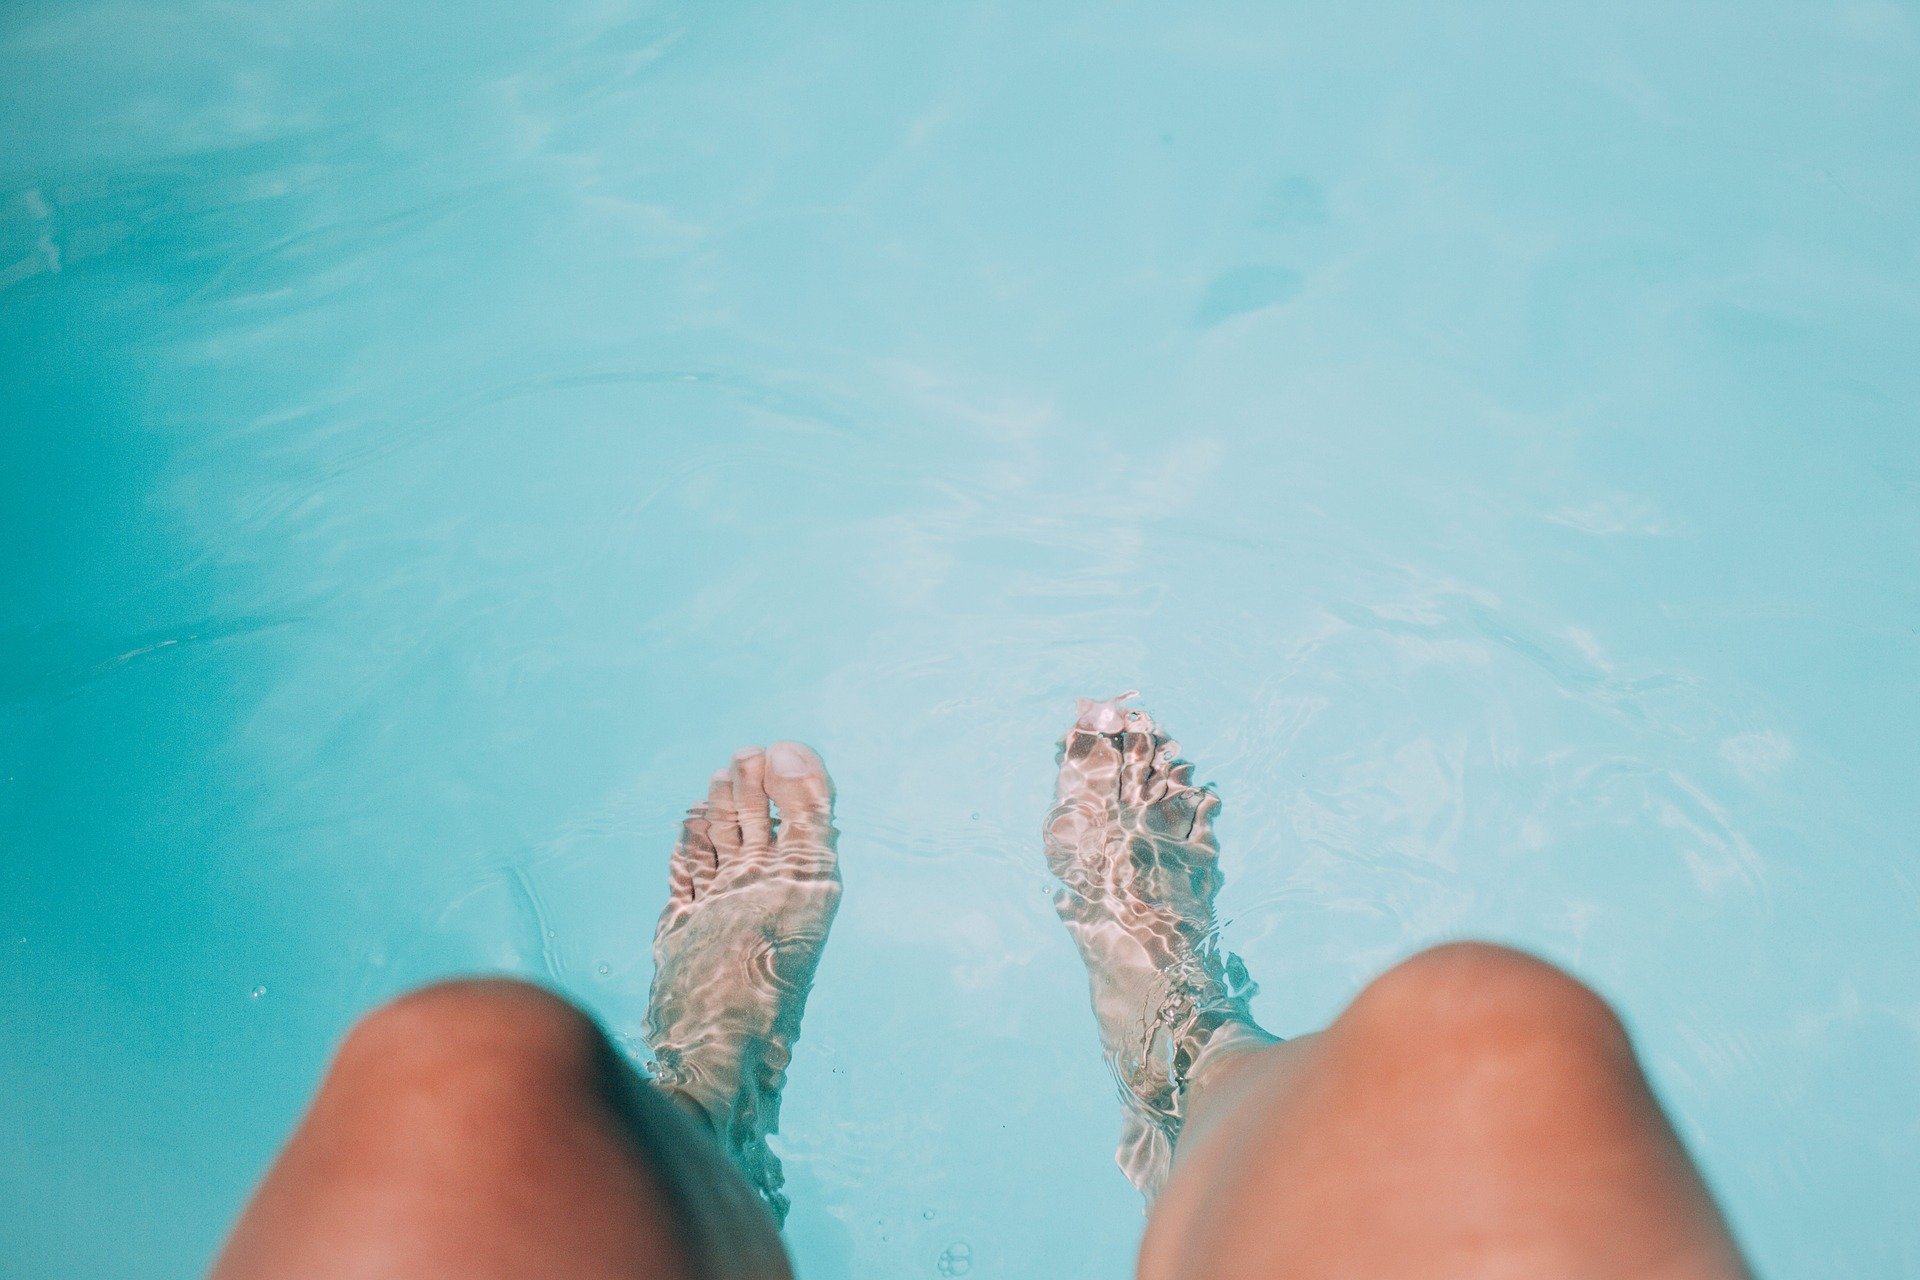 Hygiene and swimming pools: the rules to follow